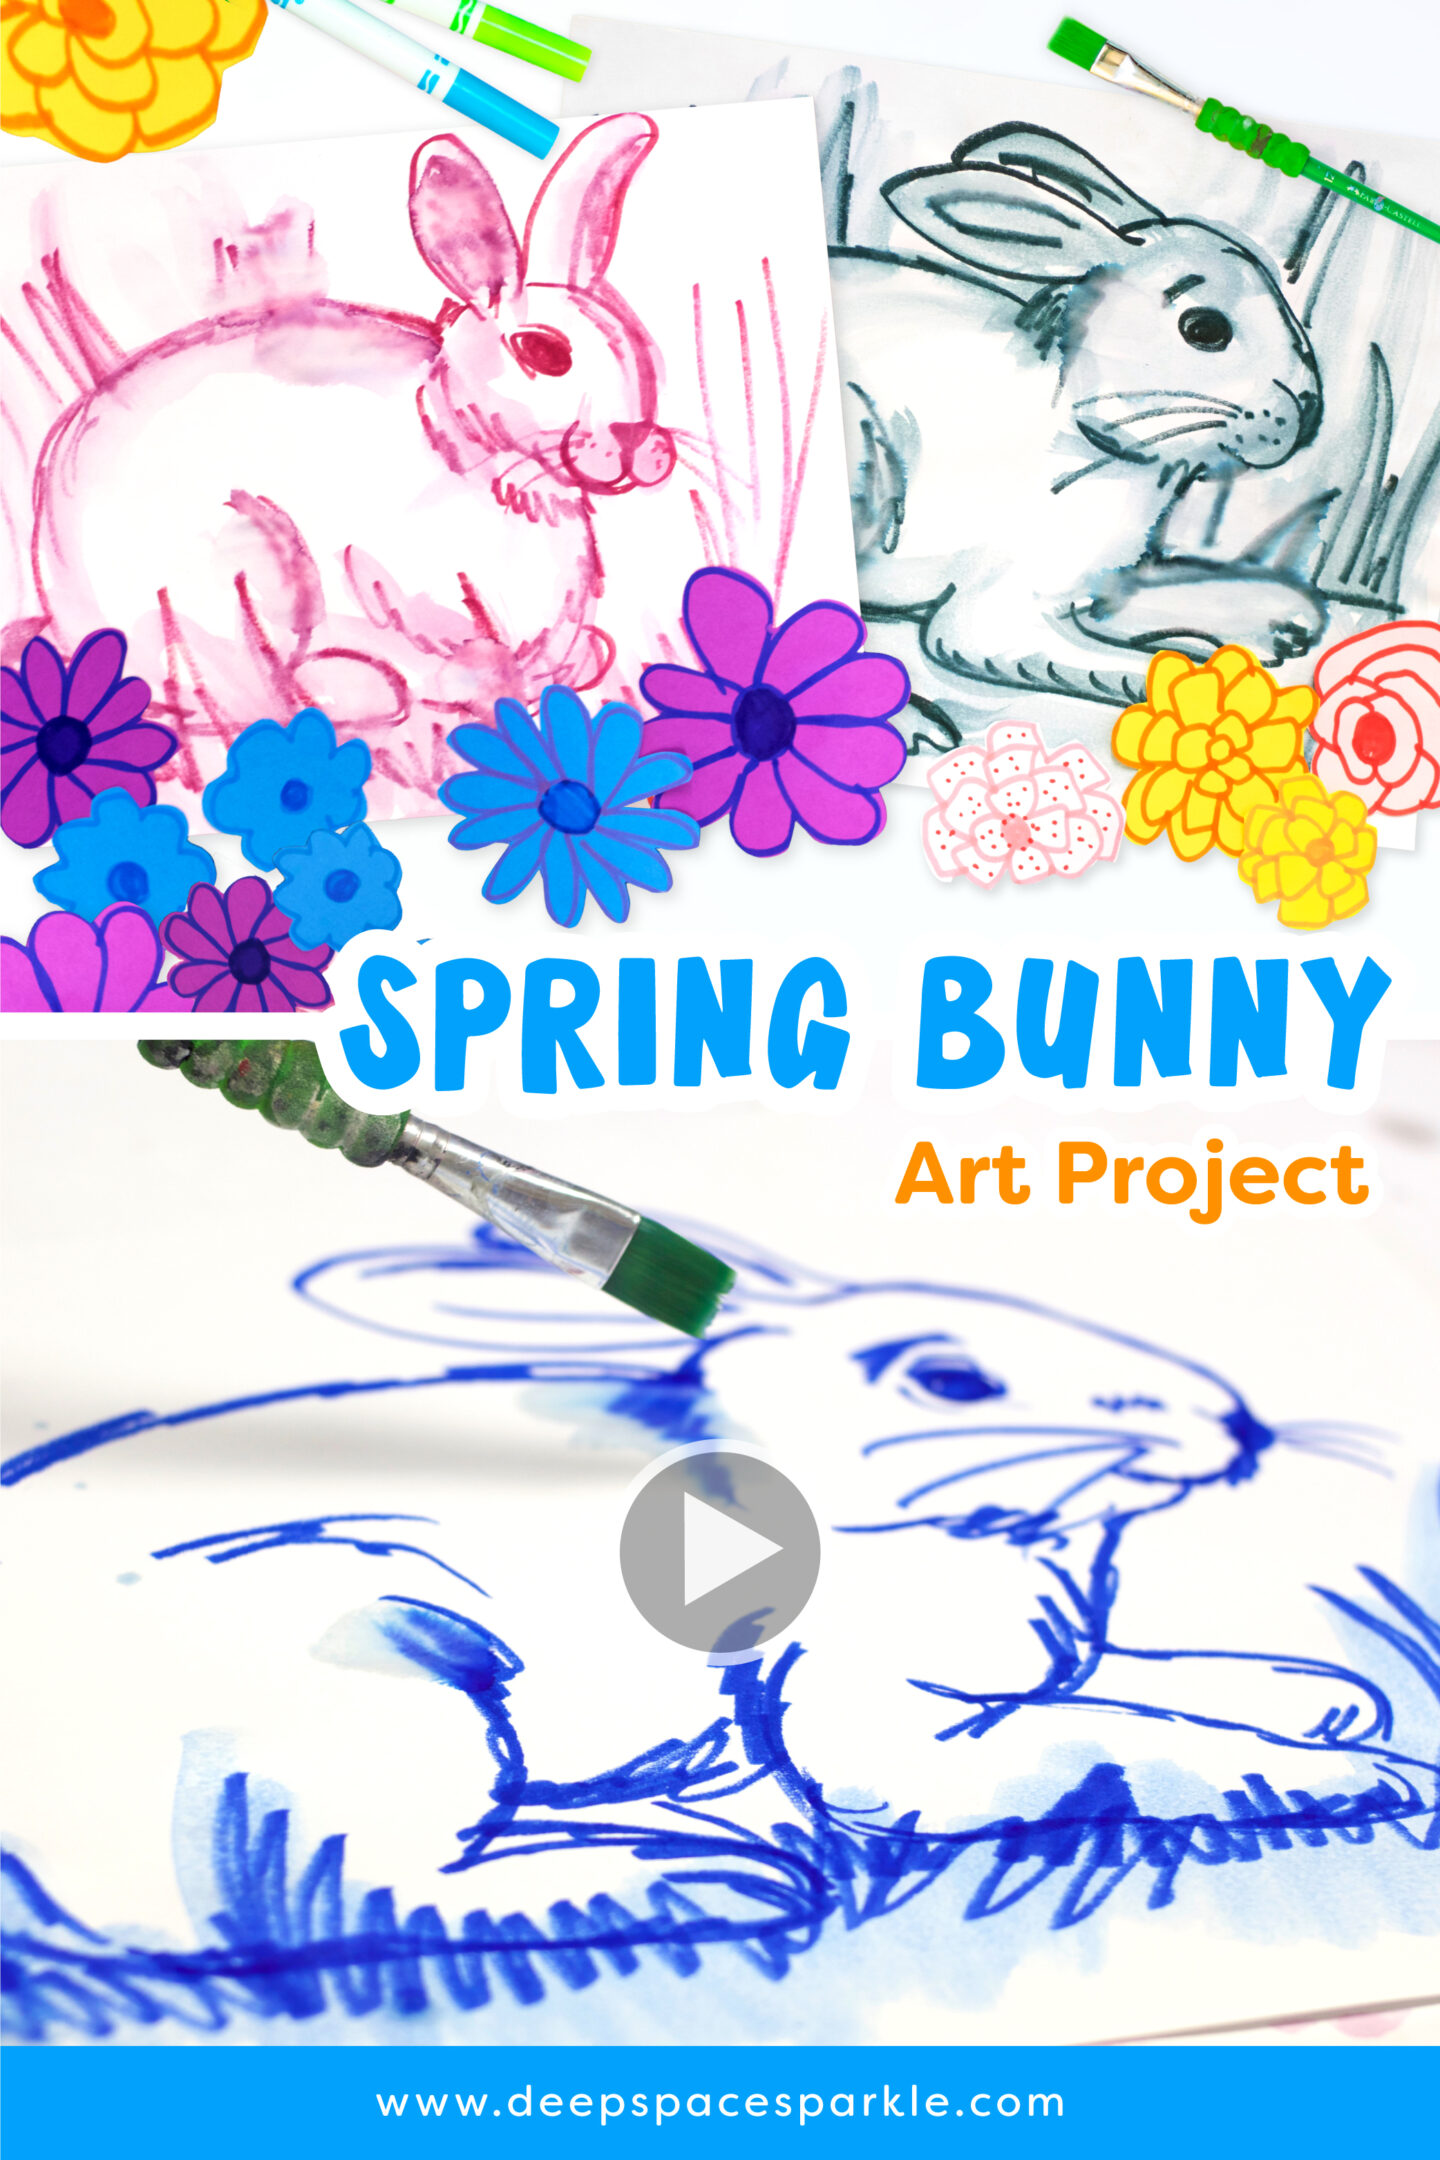 Draw, Paint & Create a Spring Bunny: Easter Art Project for Kids